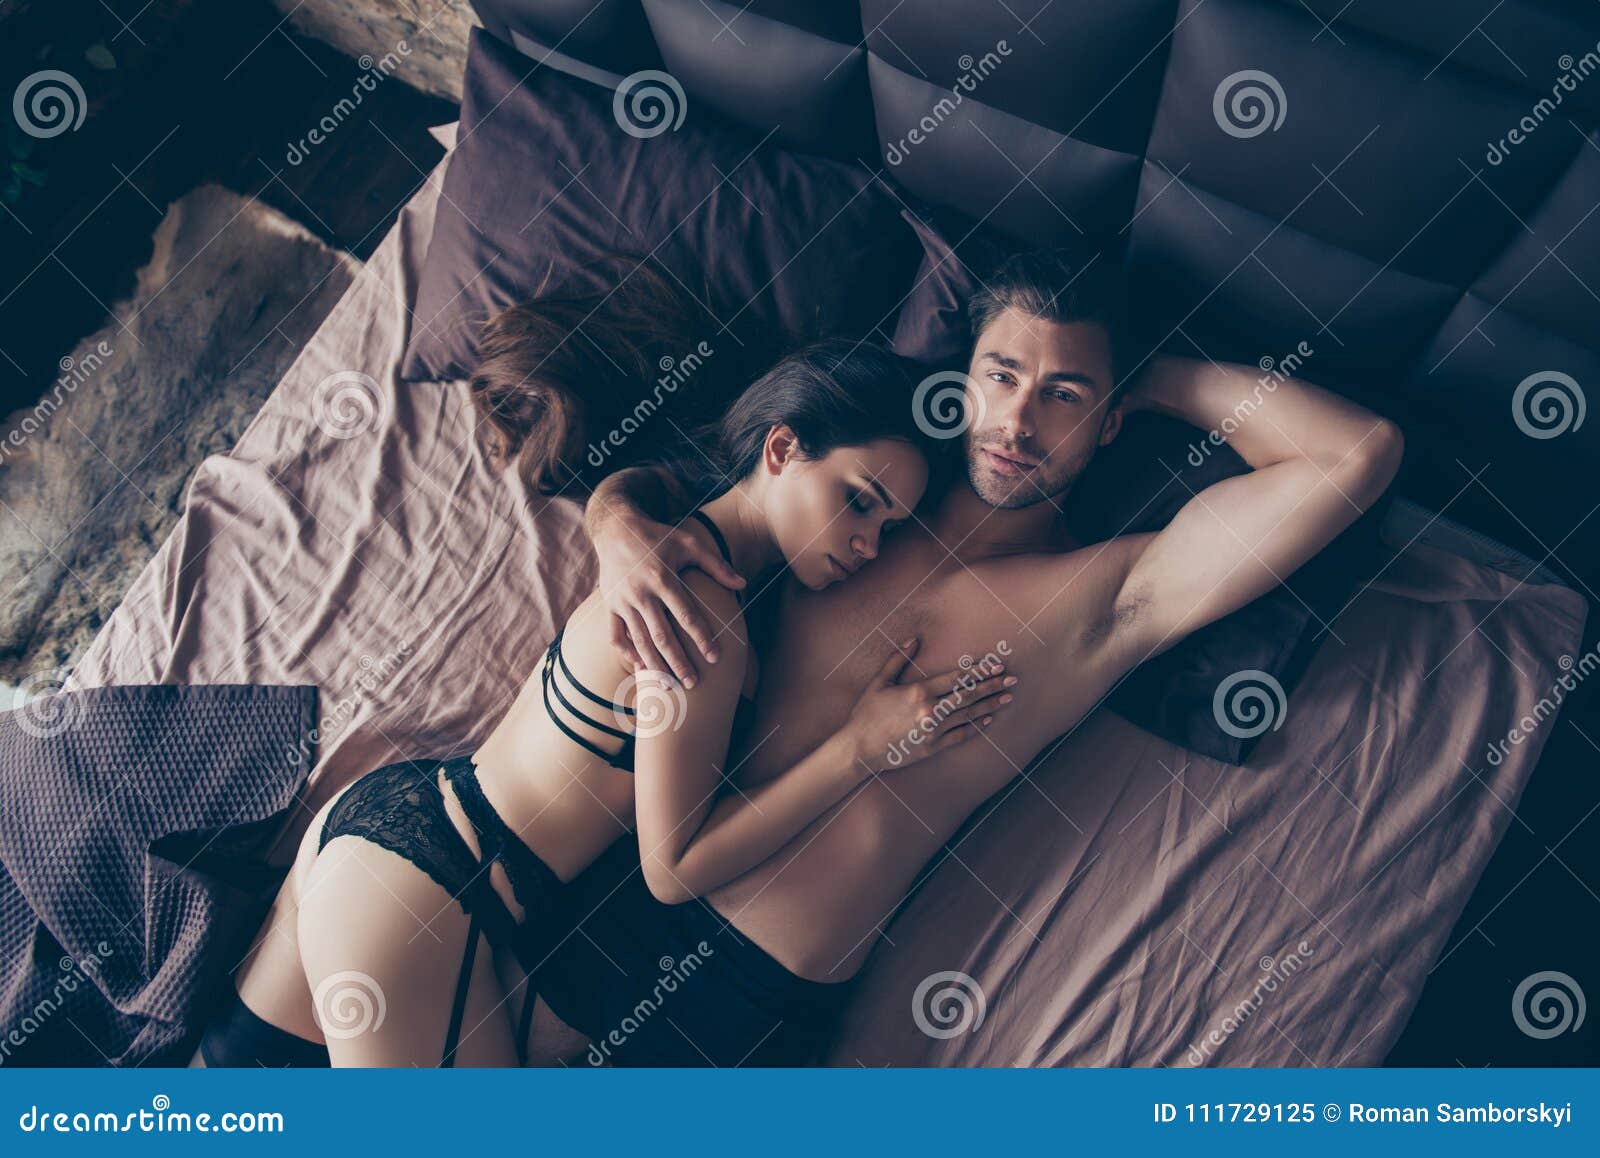 Above Top-view of Beautiful Half Naked Married Partners Brunets Stock Image 